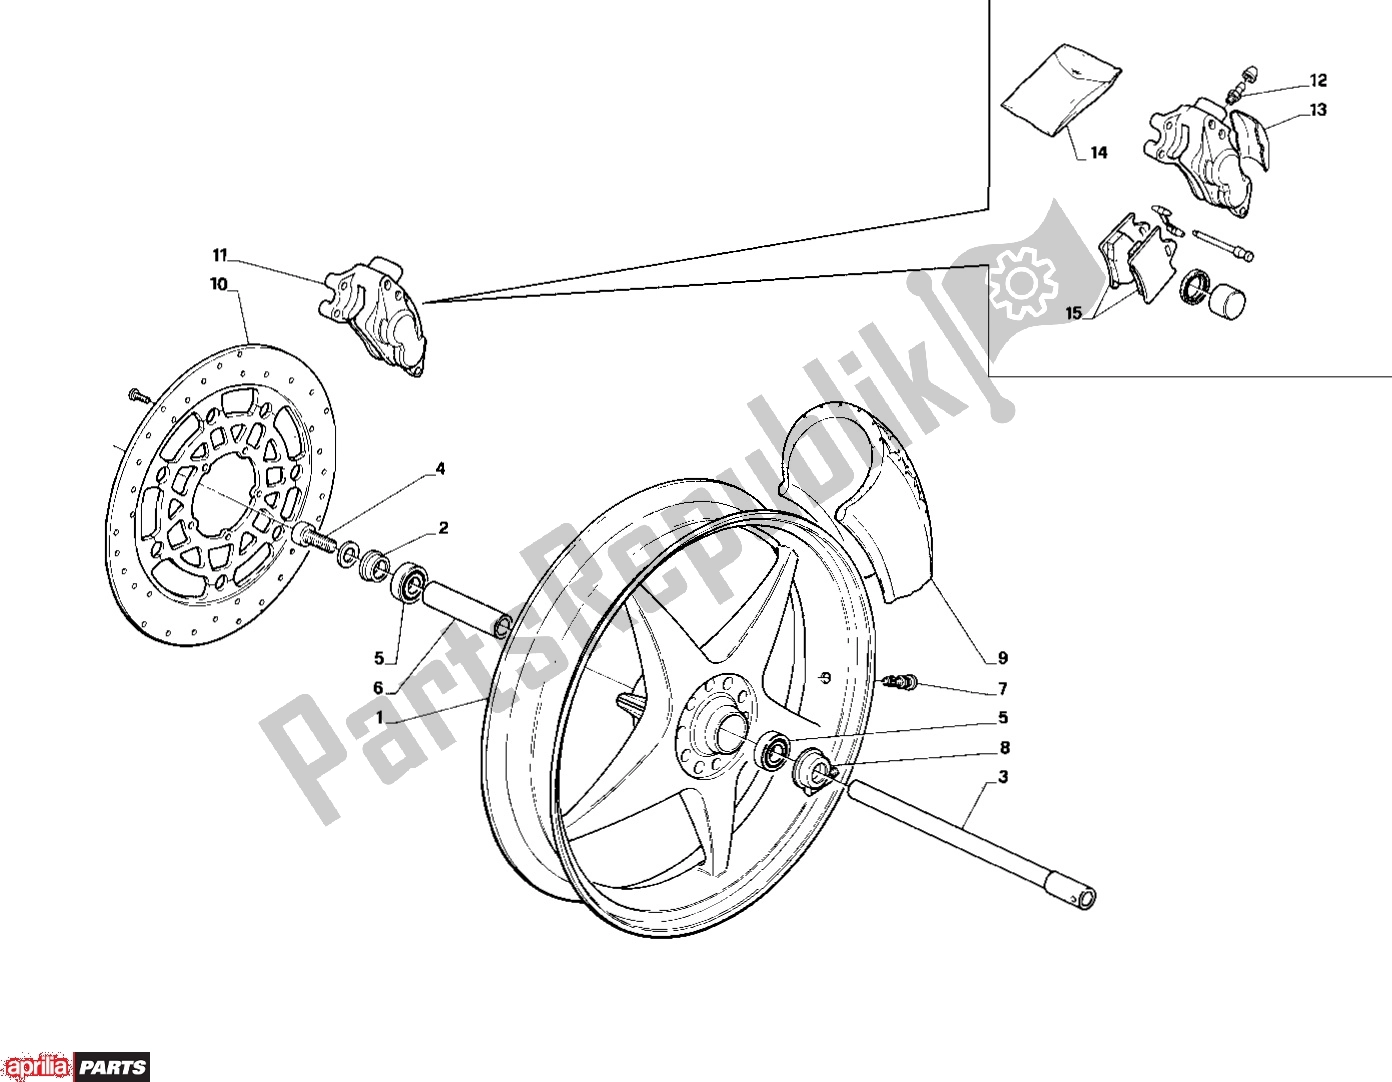 All parts for the Front Wheel of the Aprilia Europa 314 125 1990 - 1991